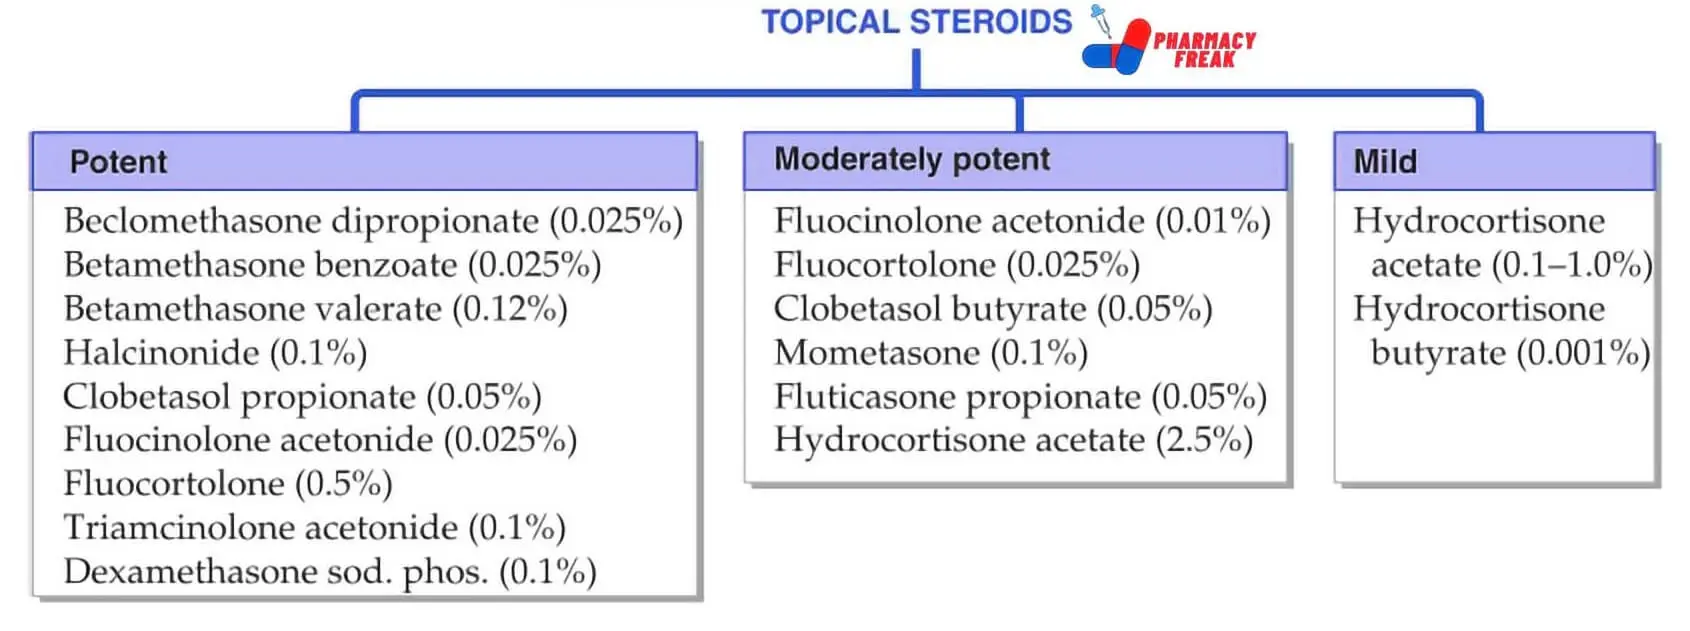 CLASSIFICATION OF TOPICAL STEROIDS